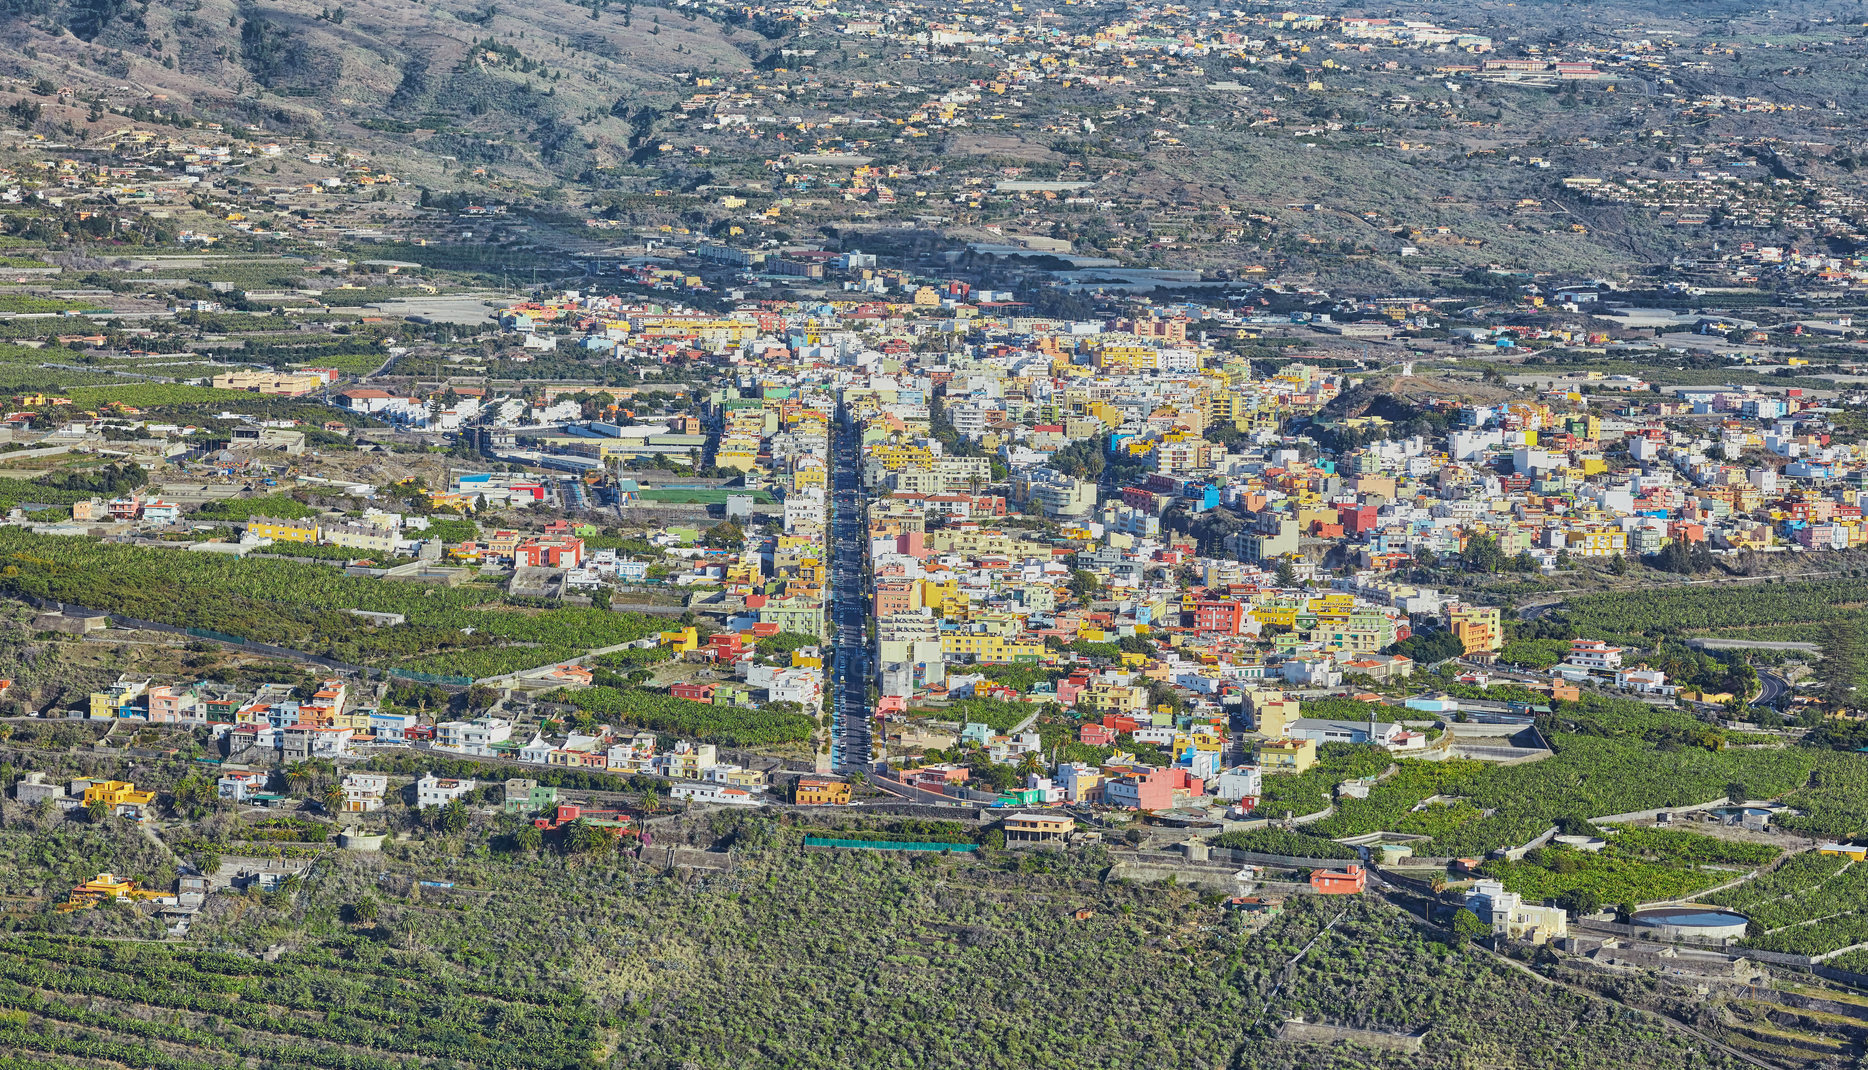 Buy stock photo Landscape aerial view of Los Llanos, La Palma in Canary Islands during the day. Scenic view of a city in an idyllic tourist travel destination from above. Small and beautiful seaside village